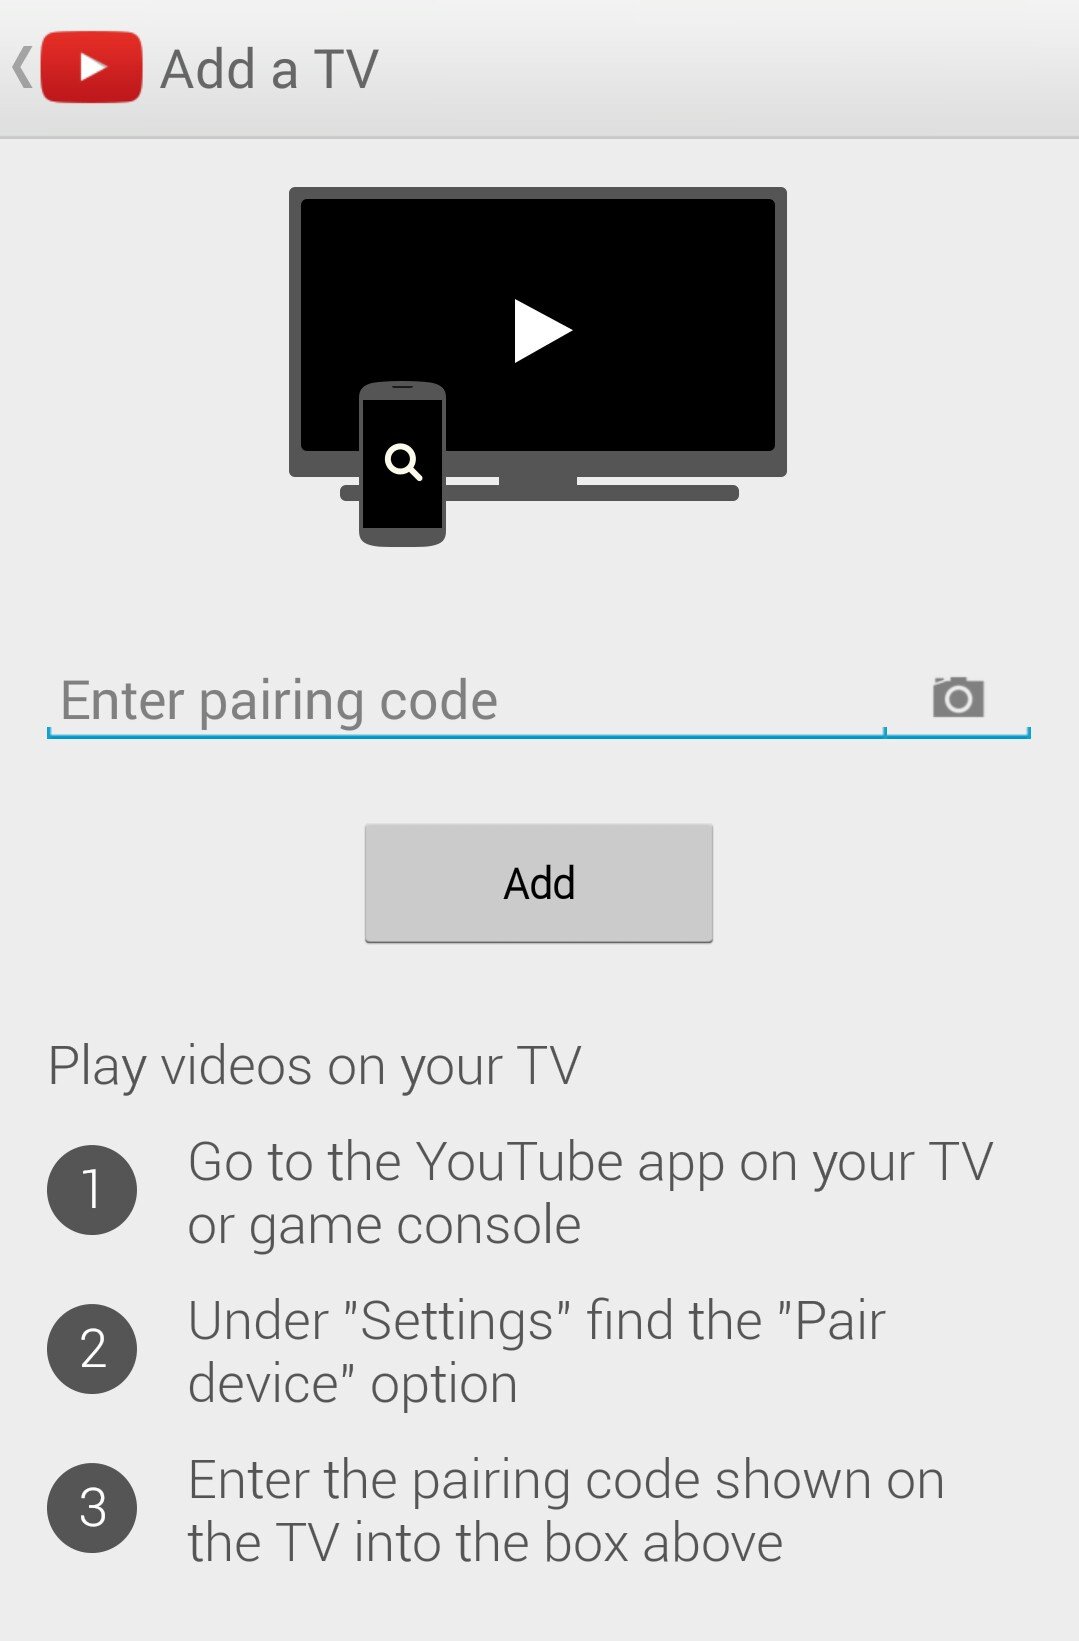 How to pair YouTube on a mobile device to a TV without Chromecast